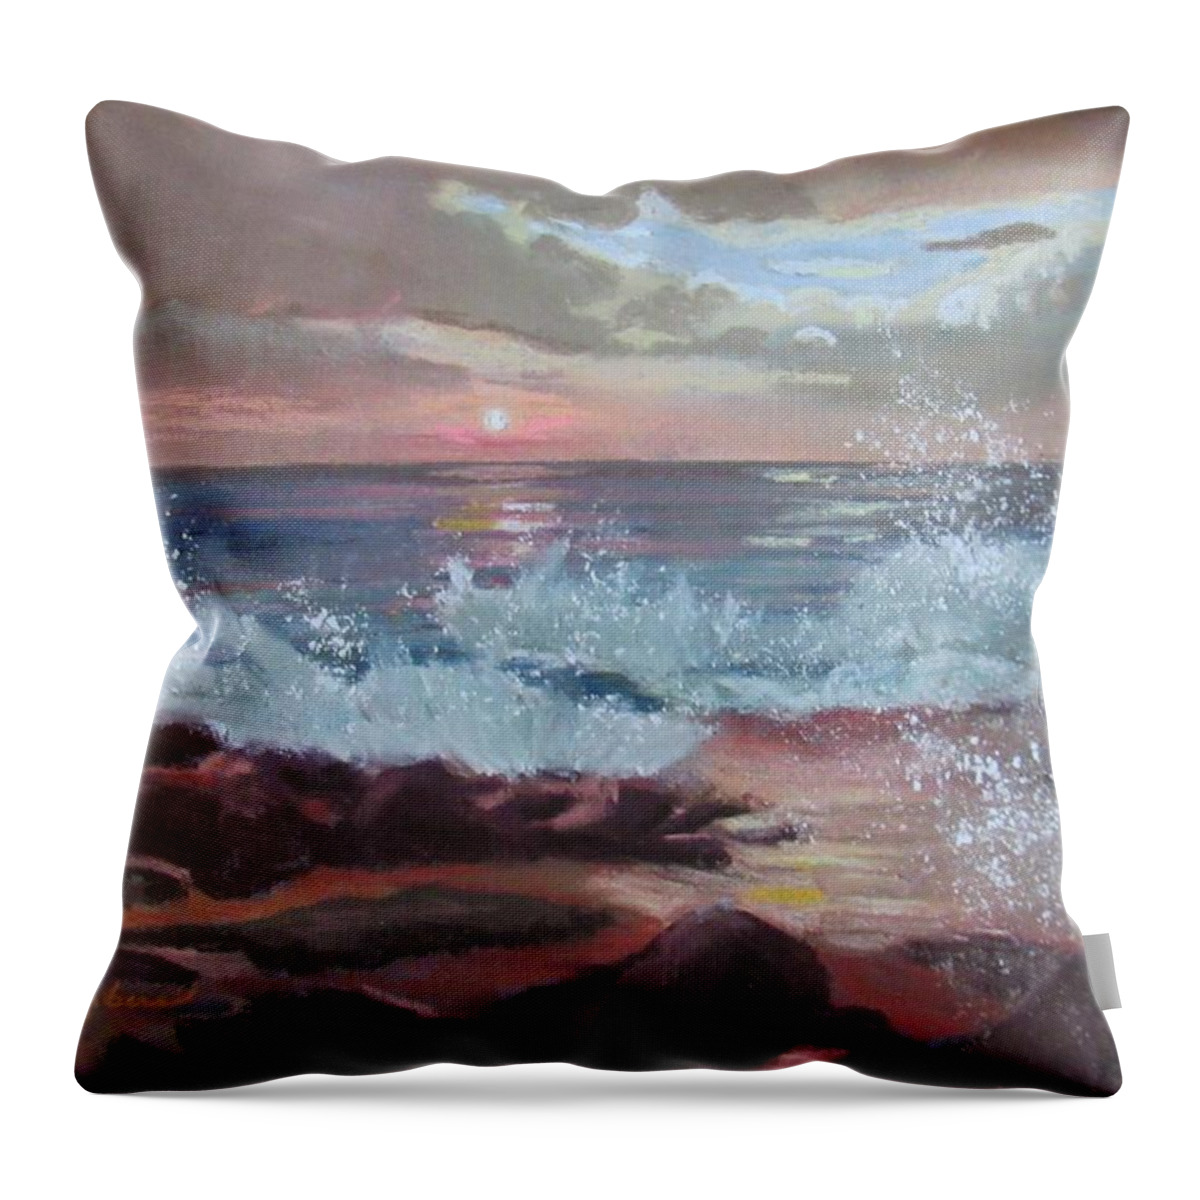 La Jolla Coast After The Storm Throw Pillow featuring the painting After The Storm by Donna Chambers